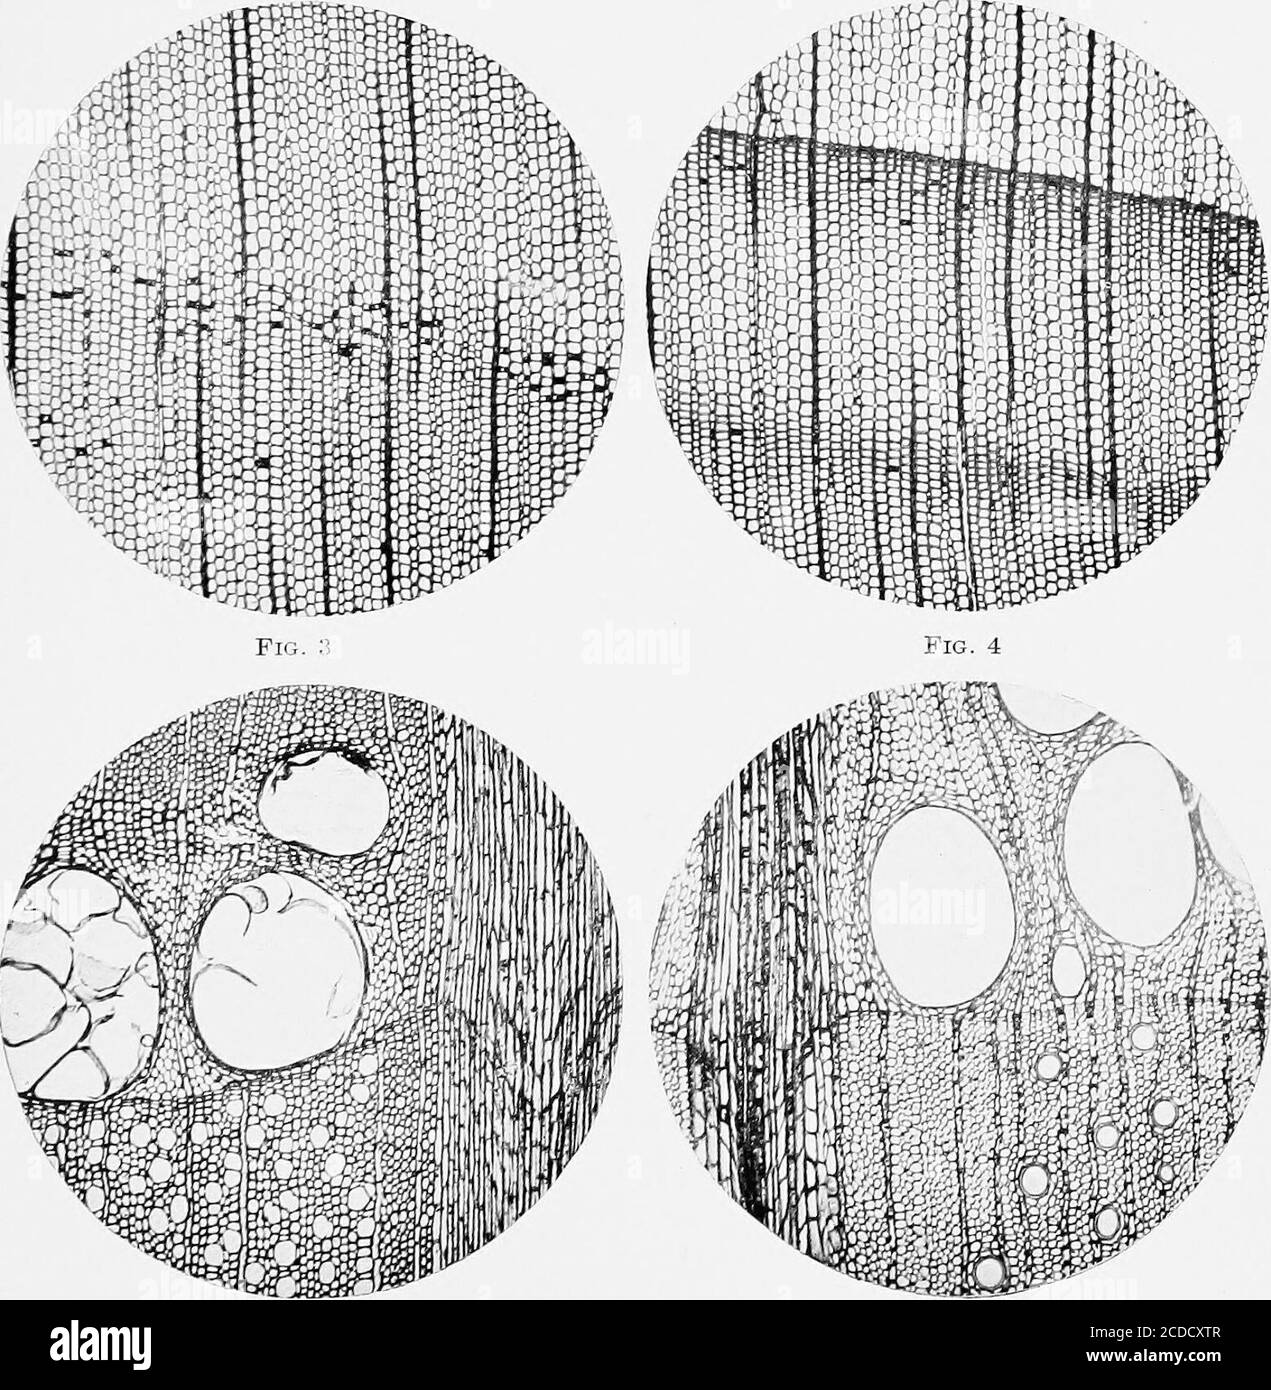 . Identification of the economic woods of the United States, including a discussion of the structural and physical properties of wood . Fig. 1 Fig. 2. Fig. 5 Fig. 6 PLATE III. DESCRIPTION OF PLATE III. Fig. 1.—Quercus alba (white oak): tangential section showing end of large rayand numerous small uniseriate rays, separated by wood fibres, and occasionalwood-parenchyma strands. Fig. 2.—Ulmus americana (American elm): cross section showing the largestpores in a single row, the small pores in wavy tangential bands. Fig. 3.—Robinia pseudacacia (black locust): cross section showing arrange-ment of Stock Photo